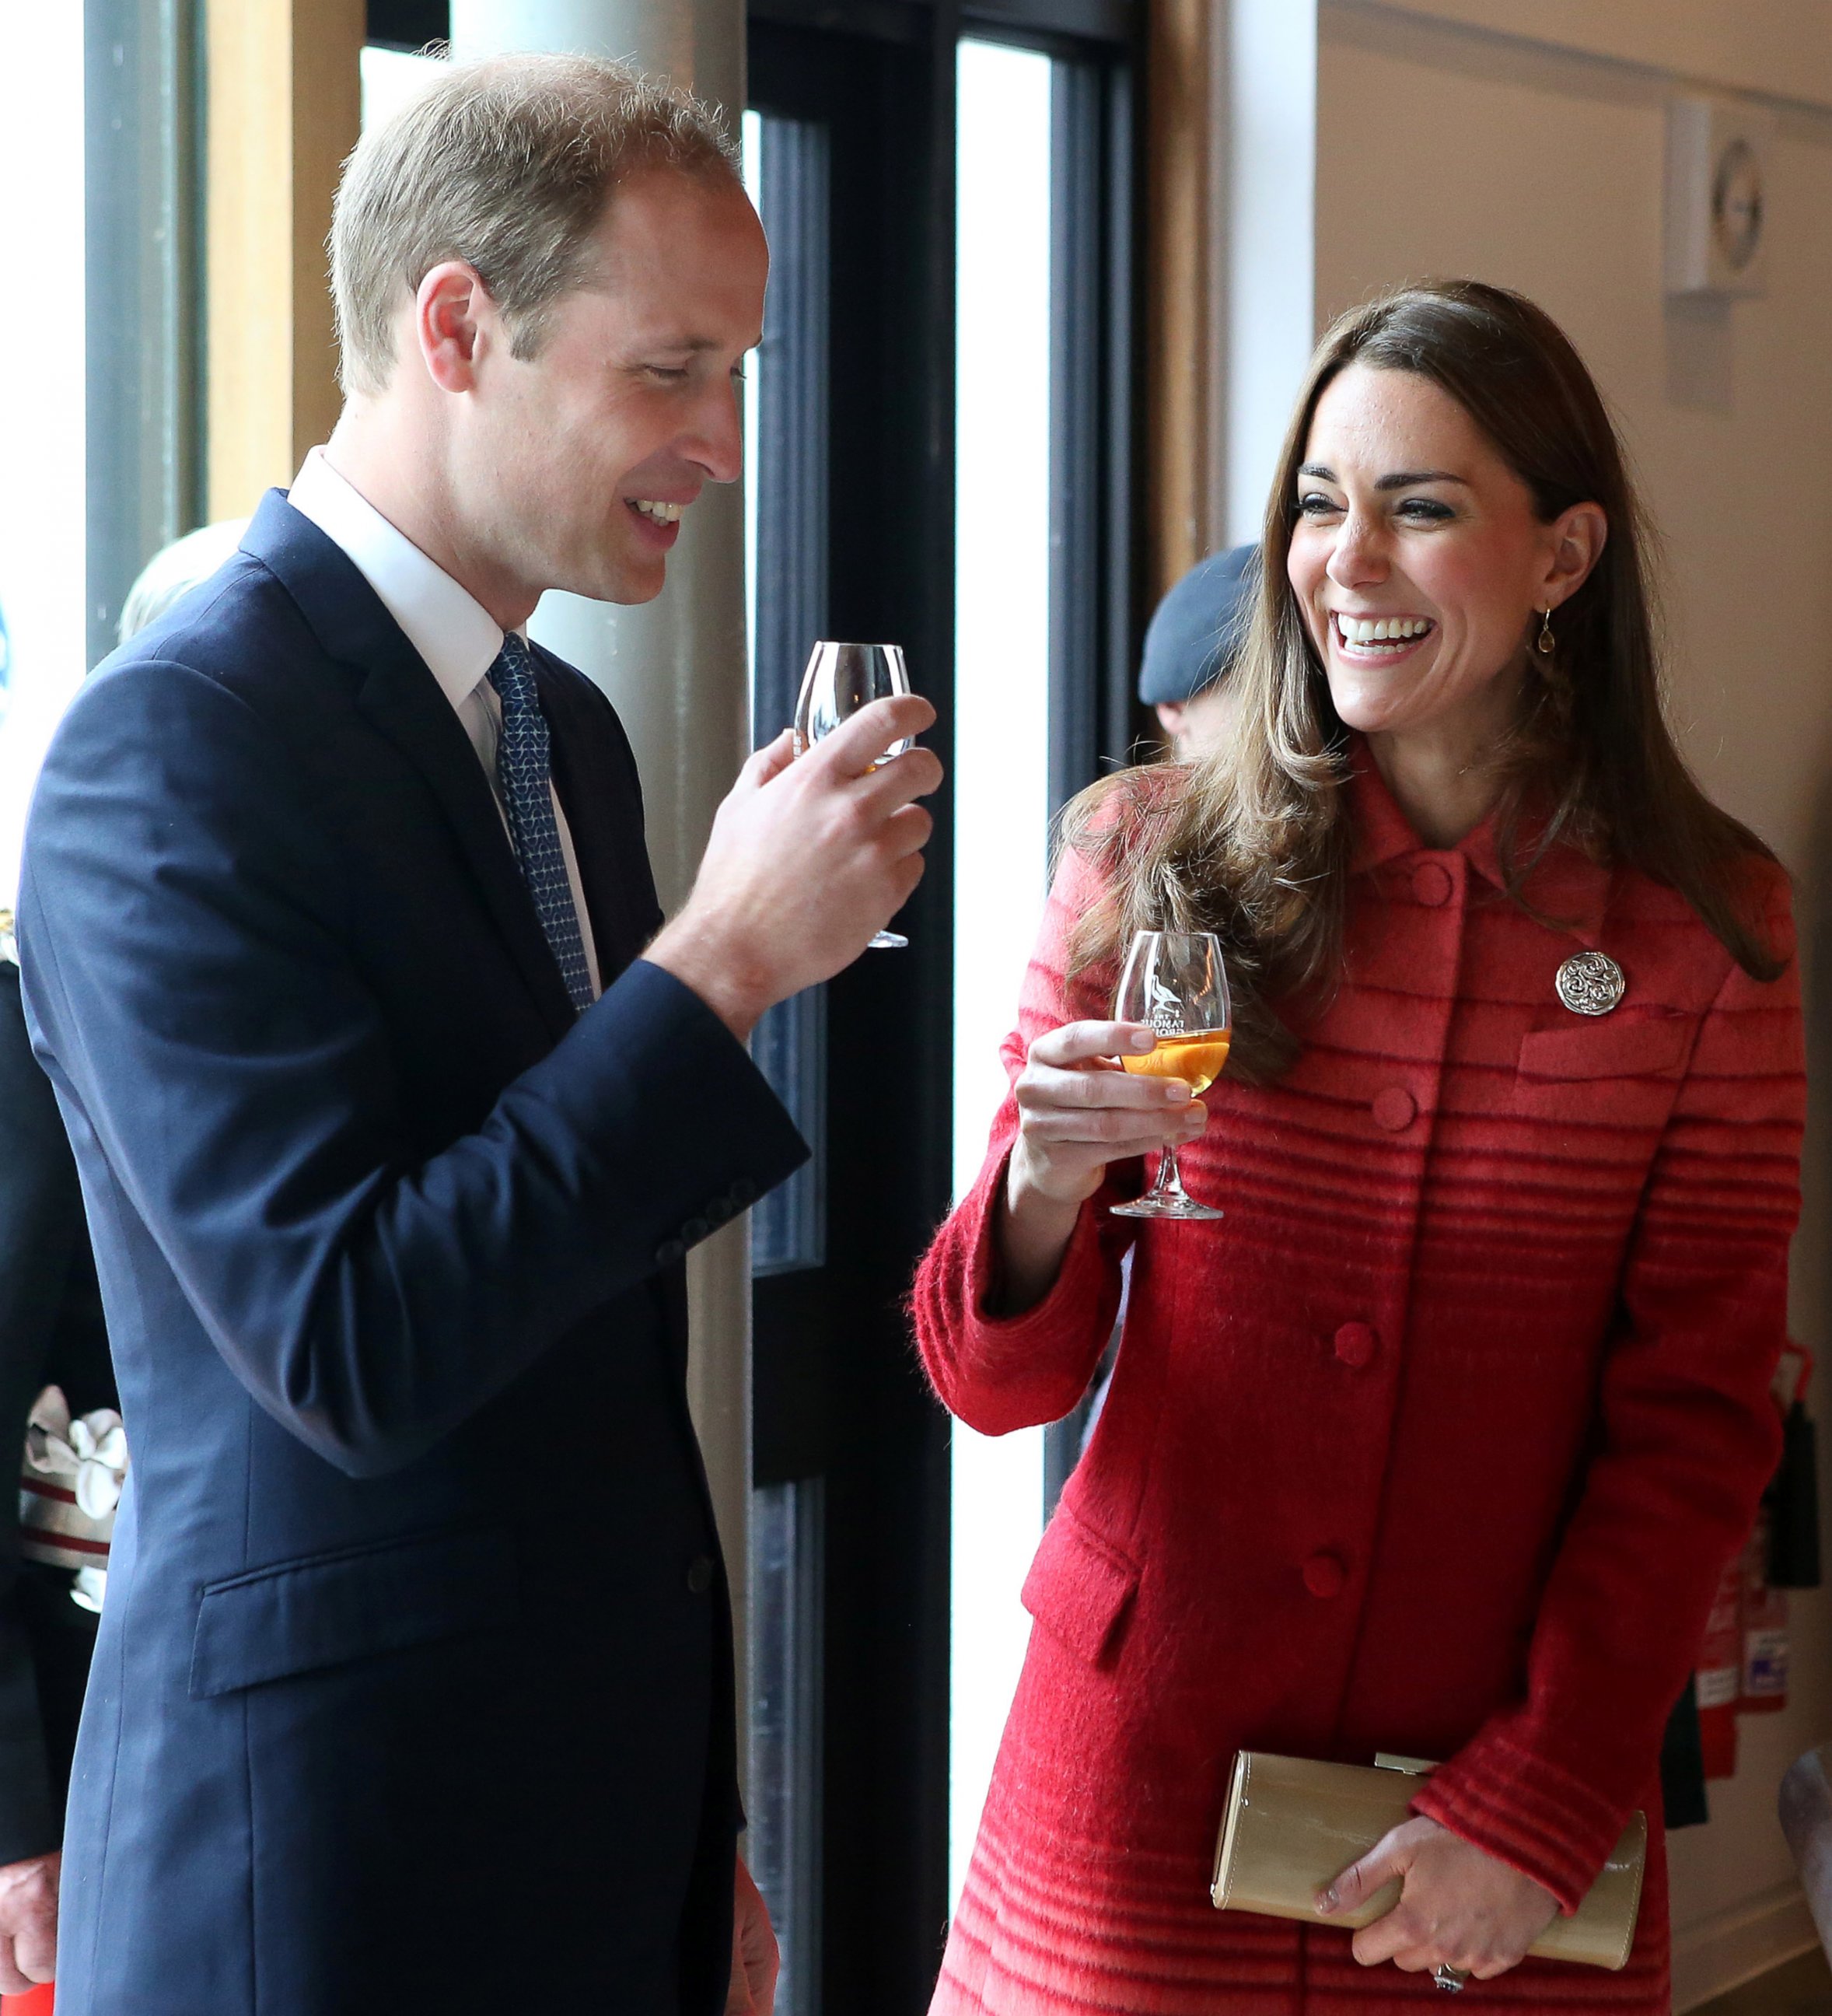 PHOTO: Catherine, Duchess of Cambridge and Prince William, Duke of Cambridge taste whisky during a tour of The Famous Grouse Distillery on May 29, 2014 in Crieff, Scotland.